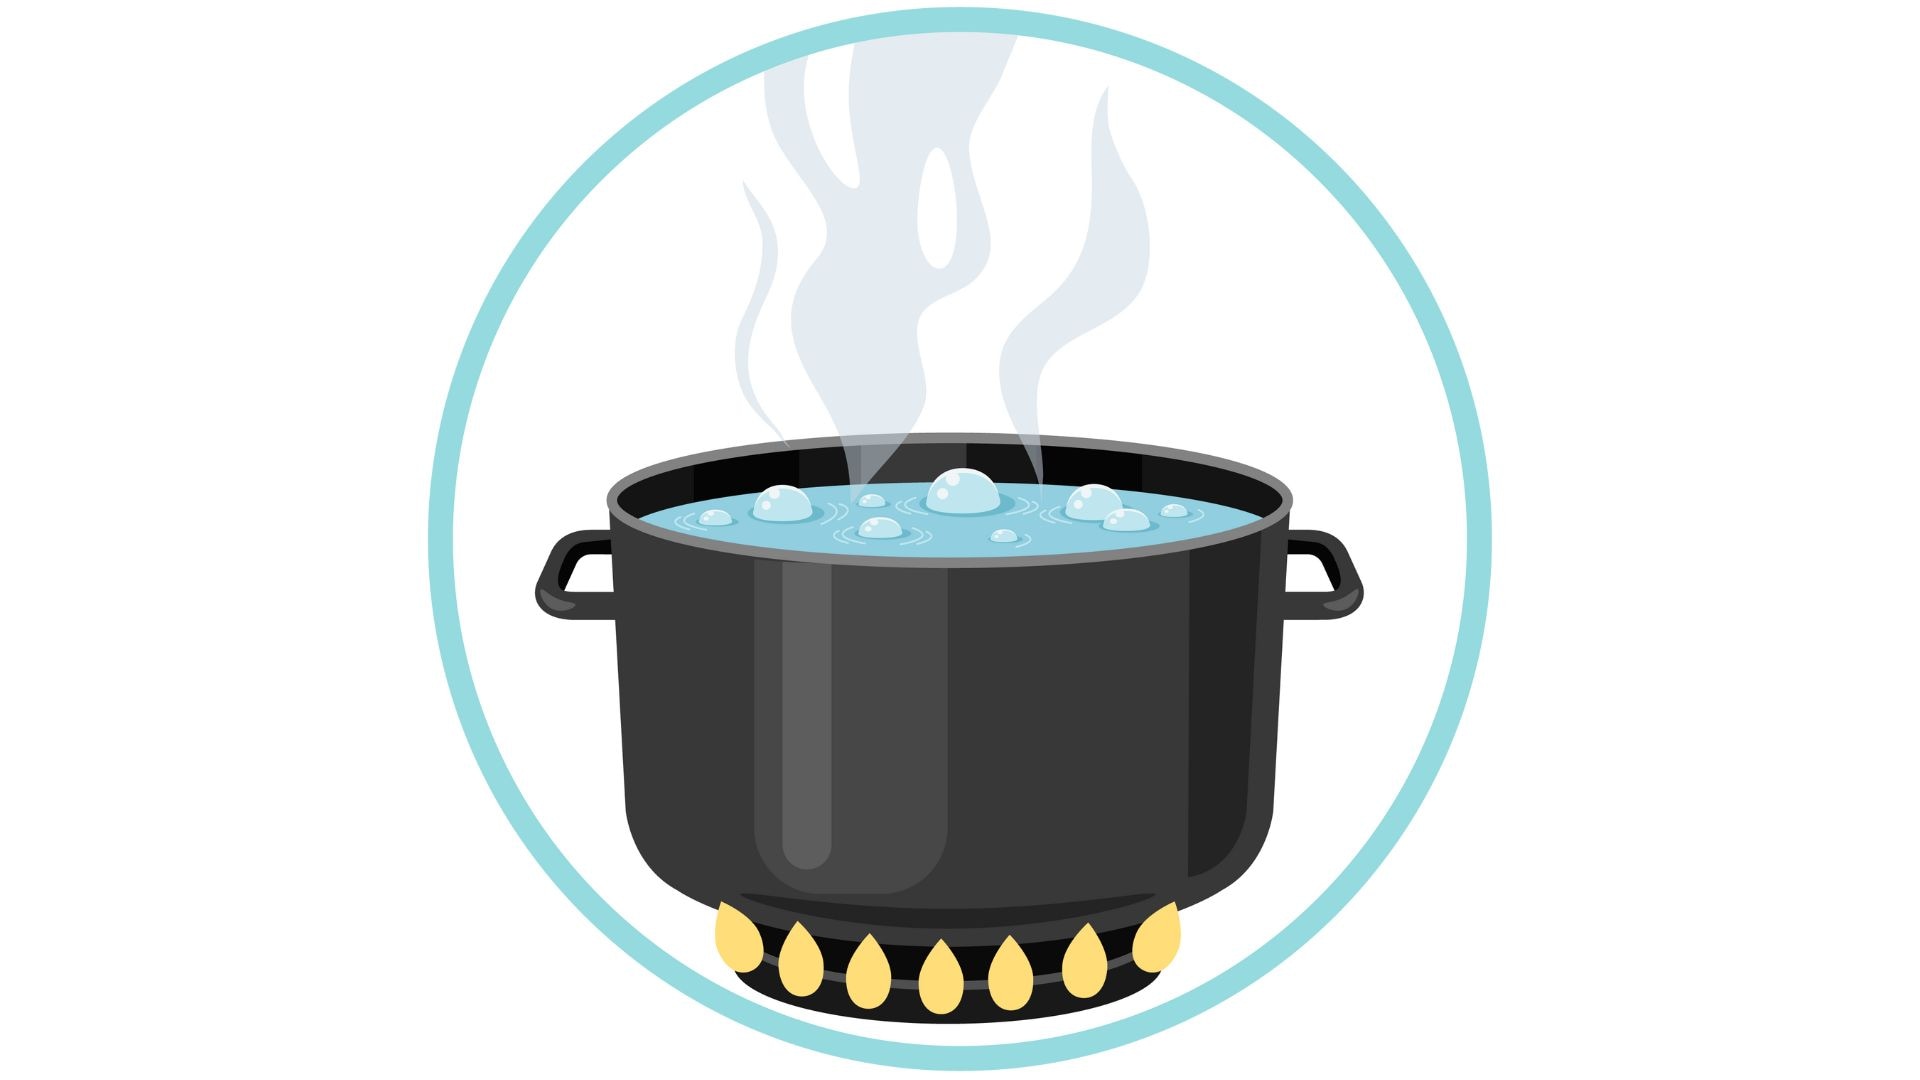 Illustration of a pot of boiling water over a flame.